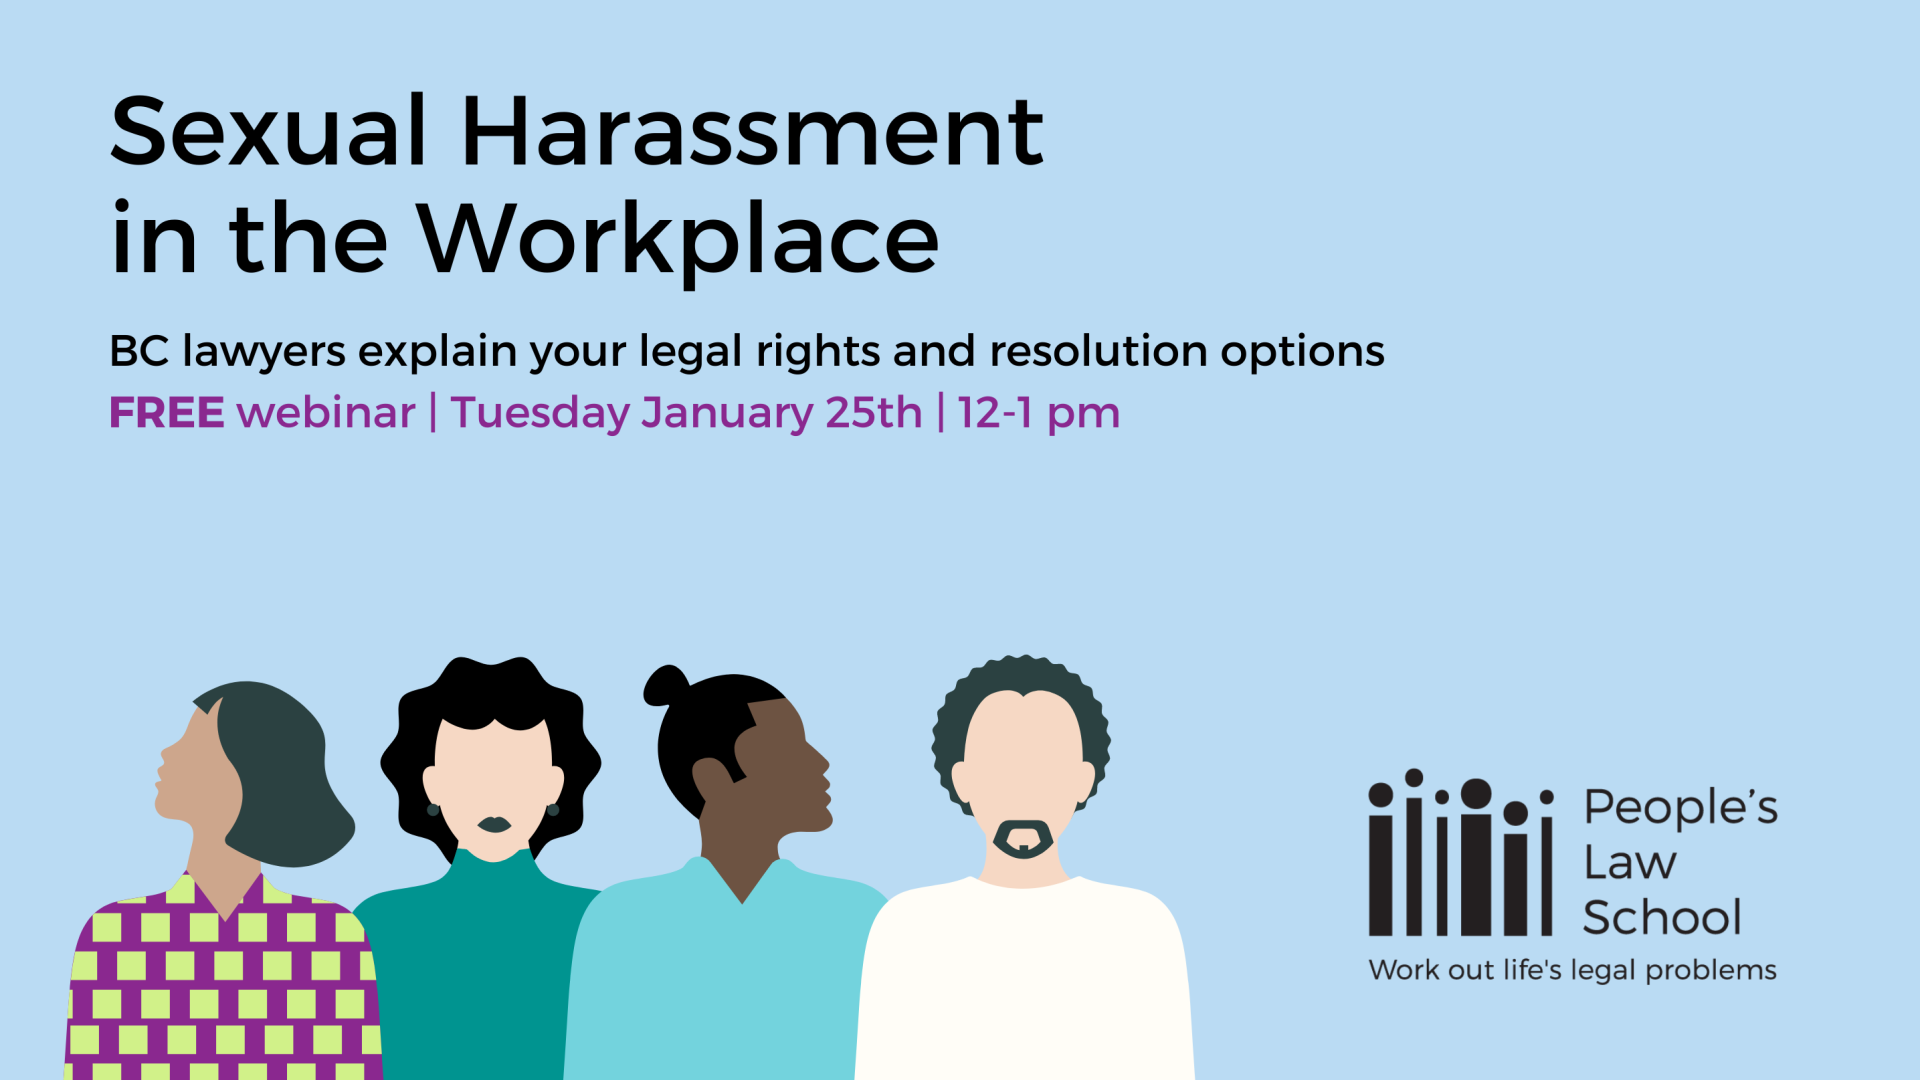 Feature image for sexual harassment webinar